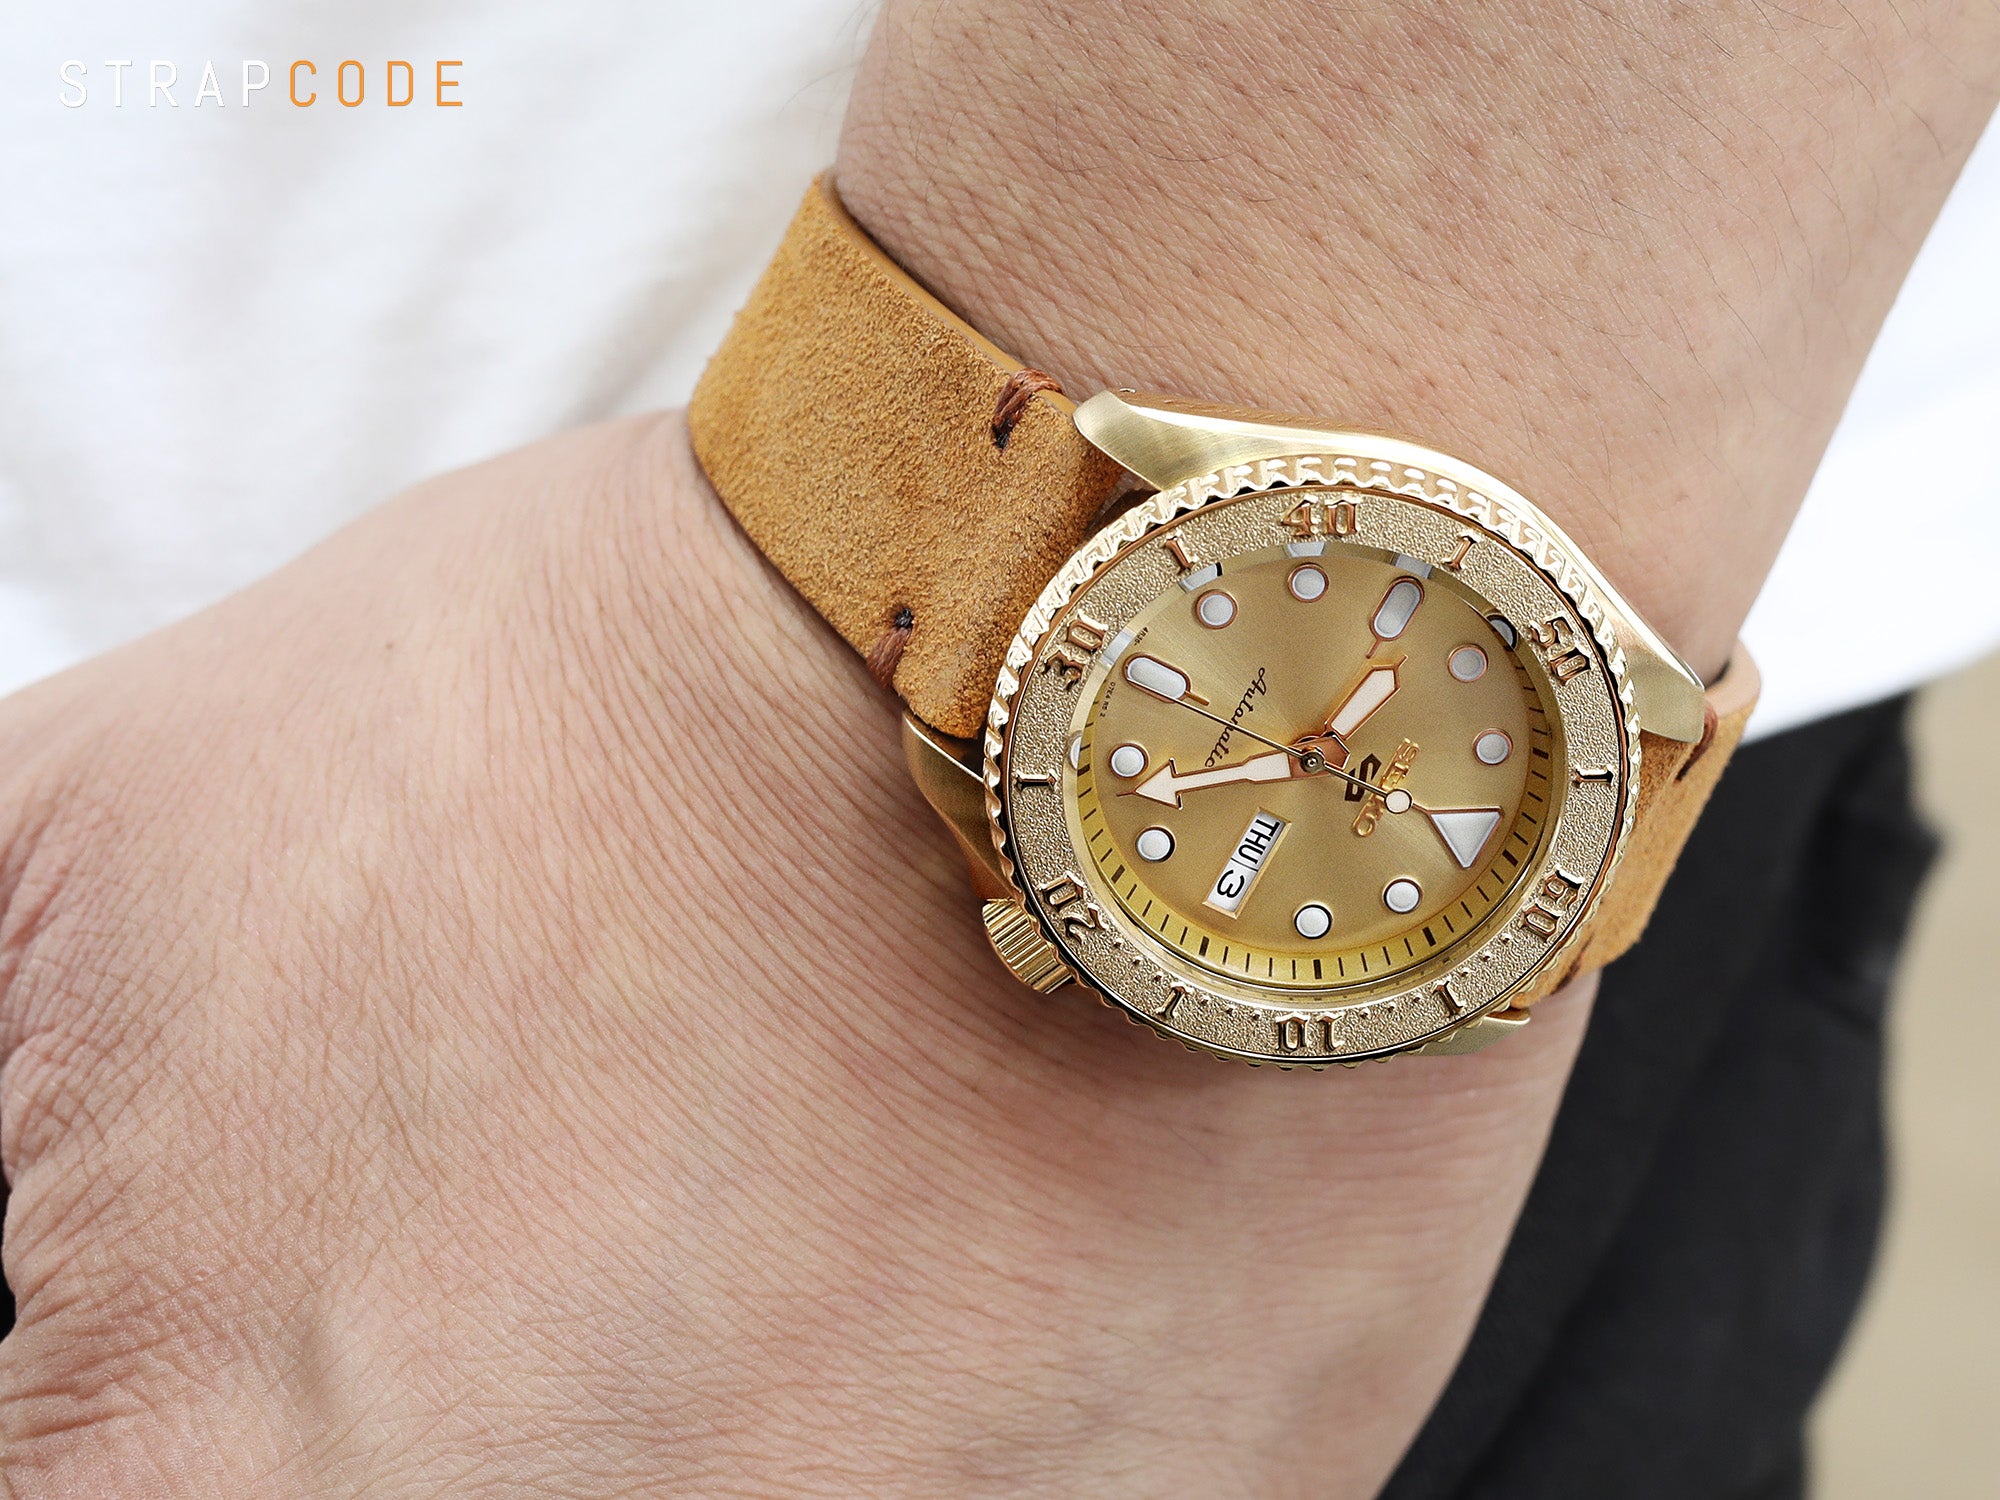 Camel color Genuine Leather Suede Quick Release watch band by Strapcode, on Seiko 5 Sports Gold watch